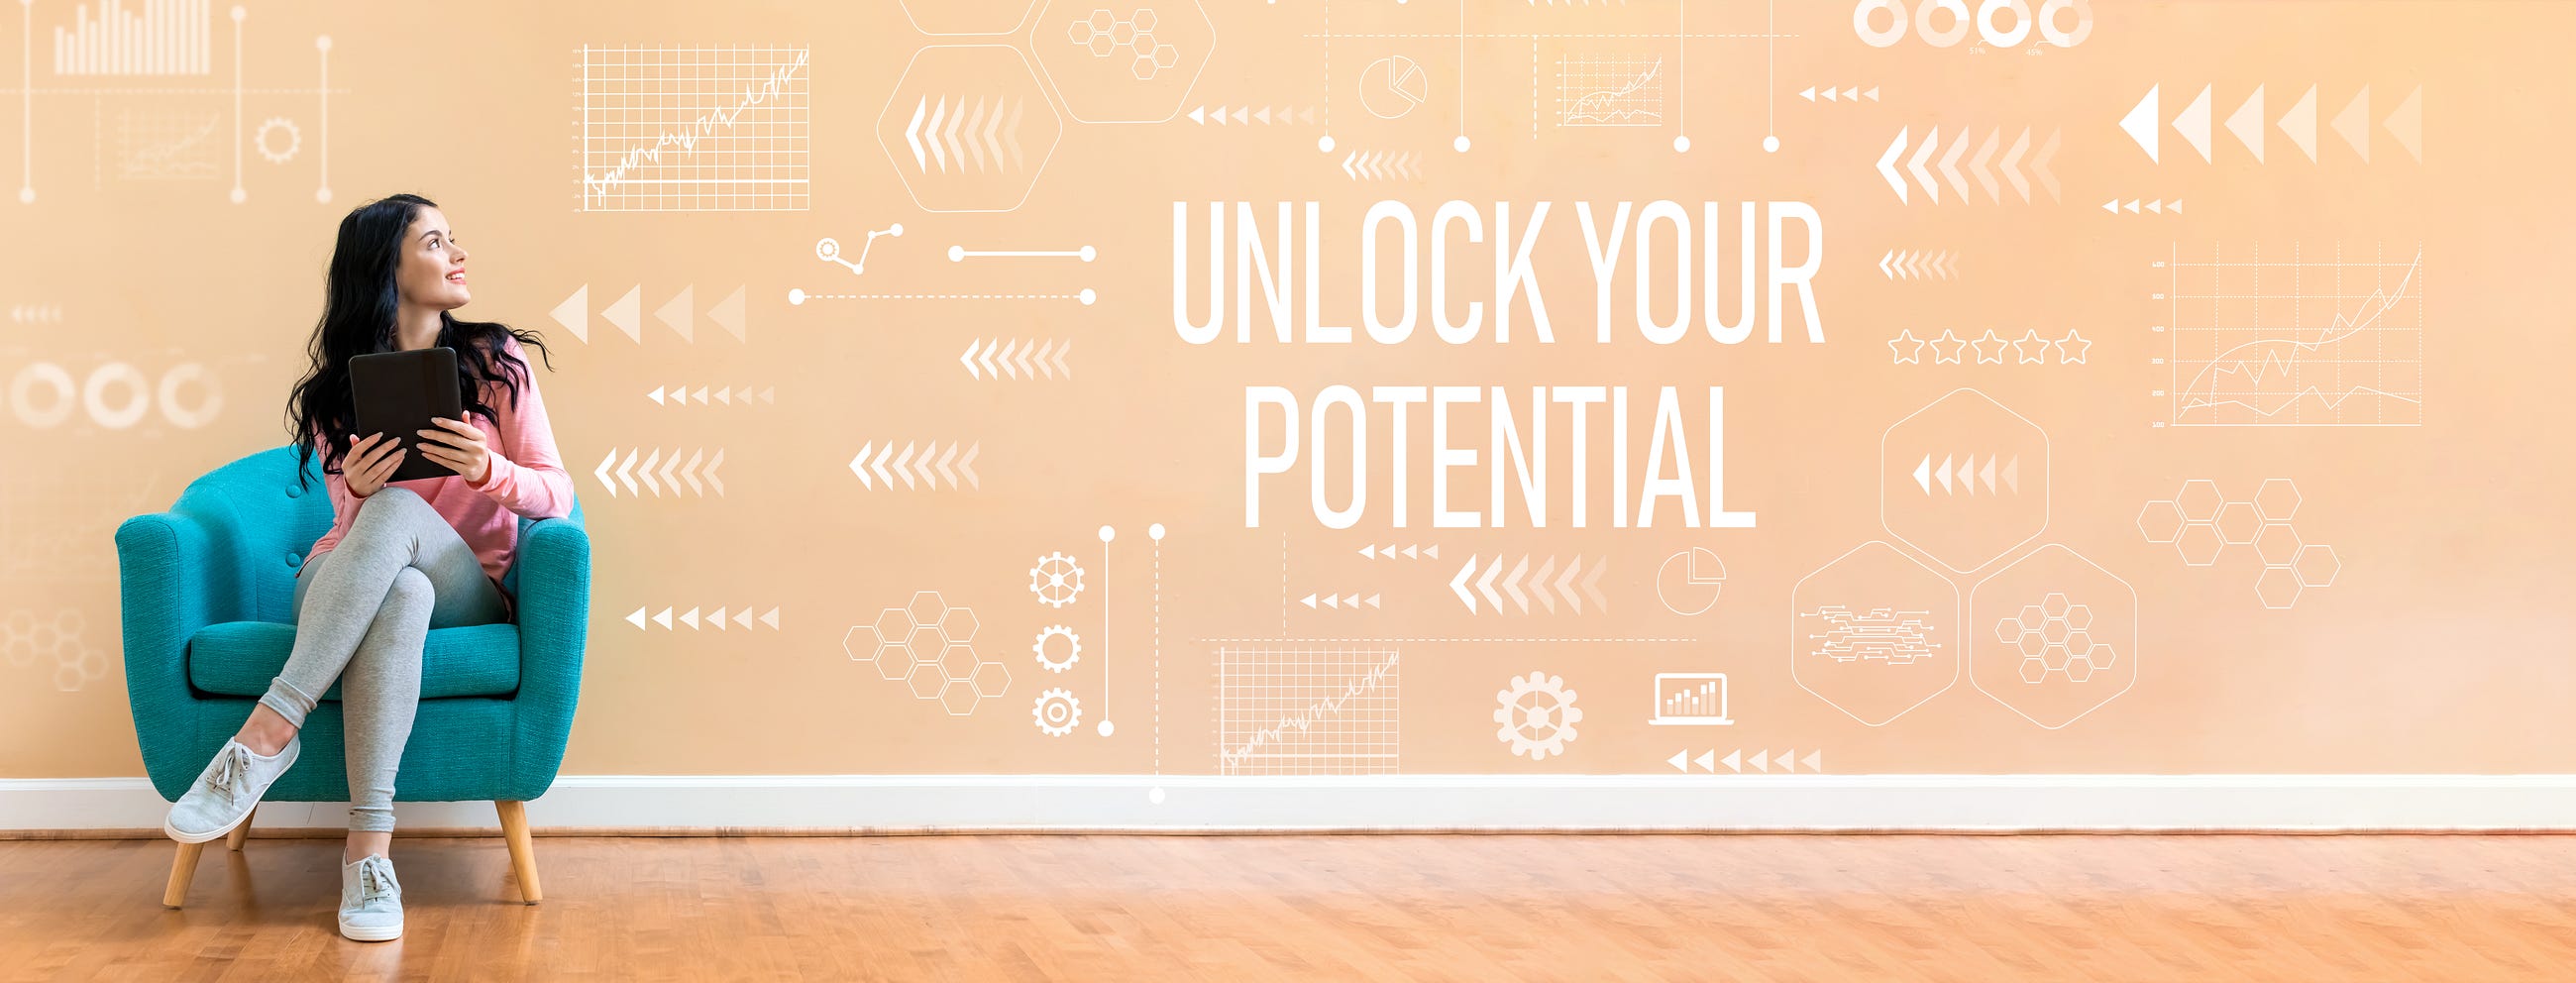 Unlock Your Expert Potential: 7 Game-Changing Tips to Skyrocket Your Authority Status